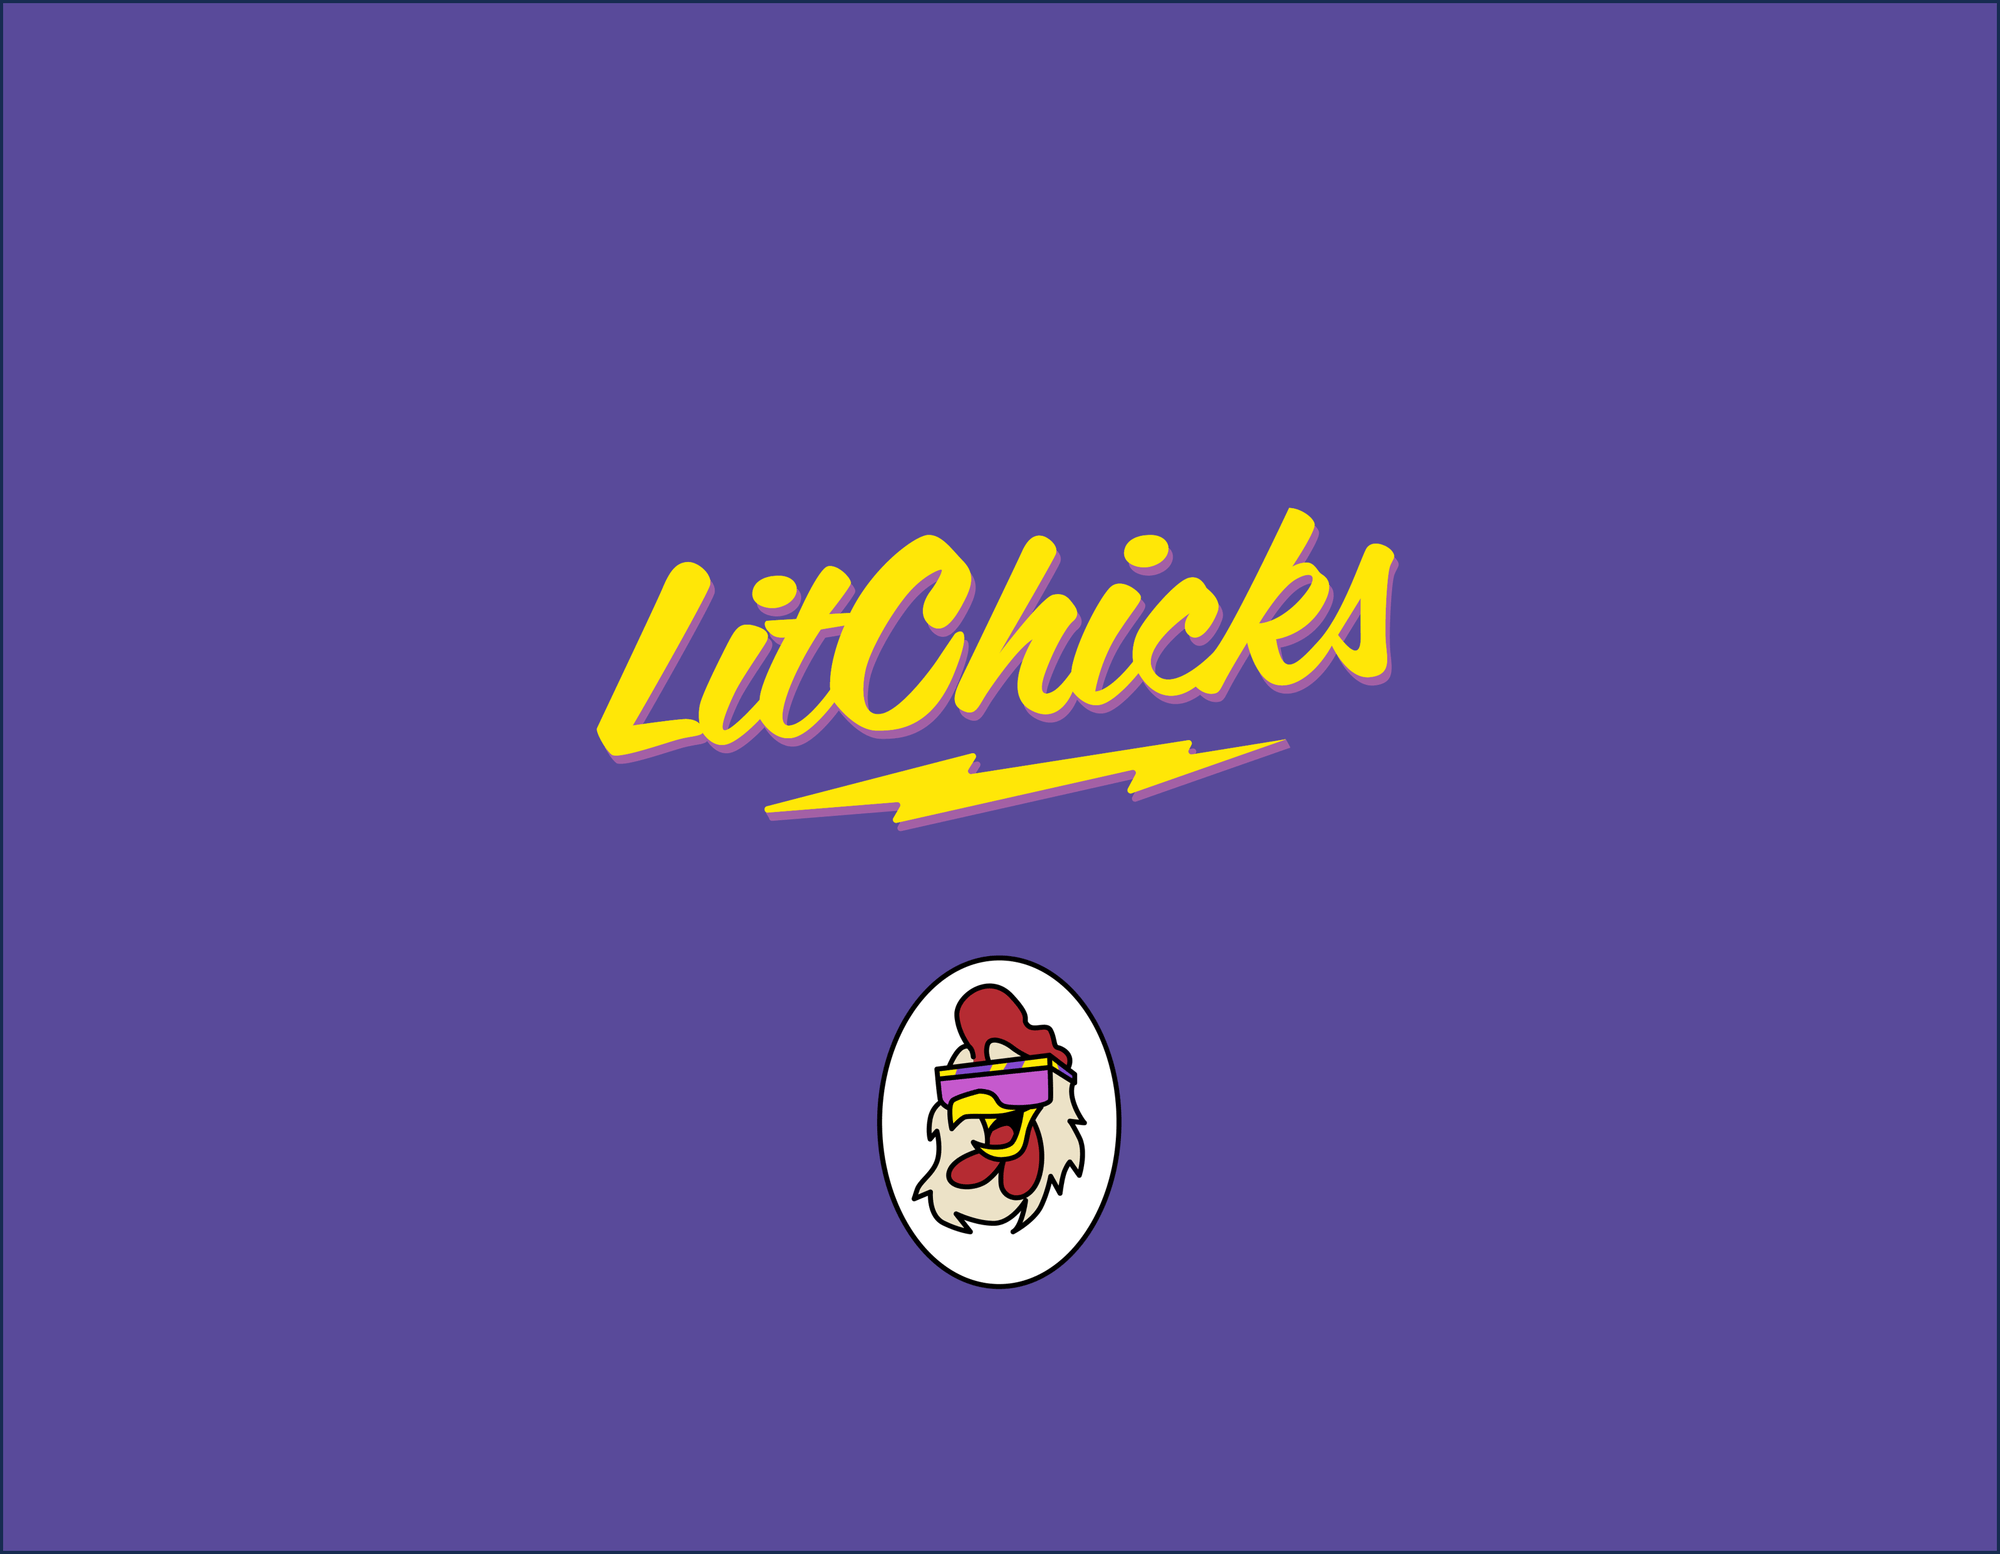 graphic of a purple circle with the yellow LitChicks text underlined with a lightning bolt and a handsome rooster on an egg below the text.